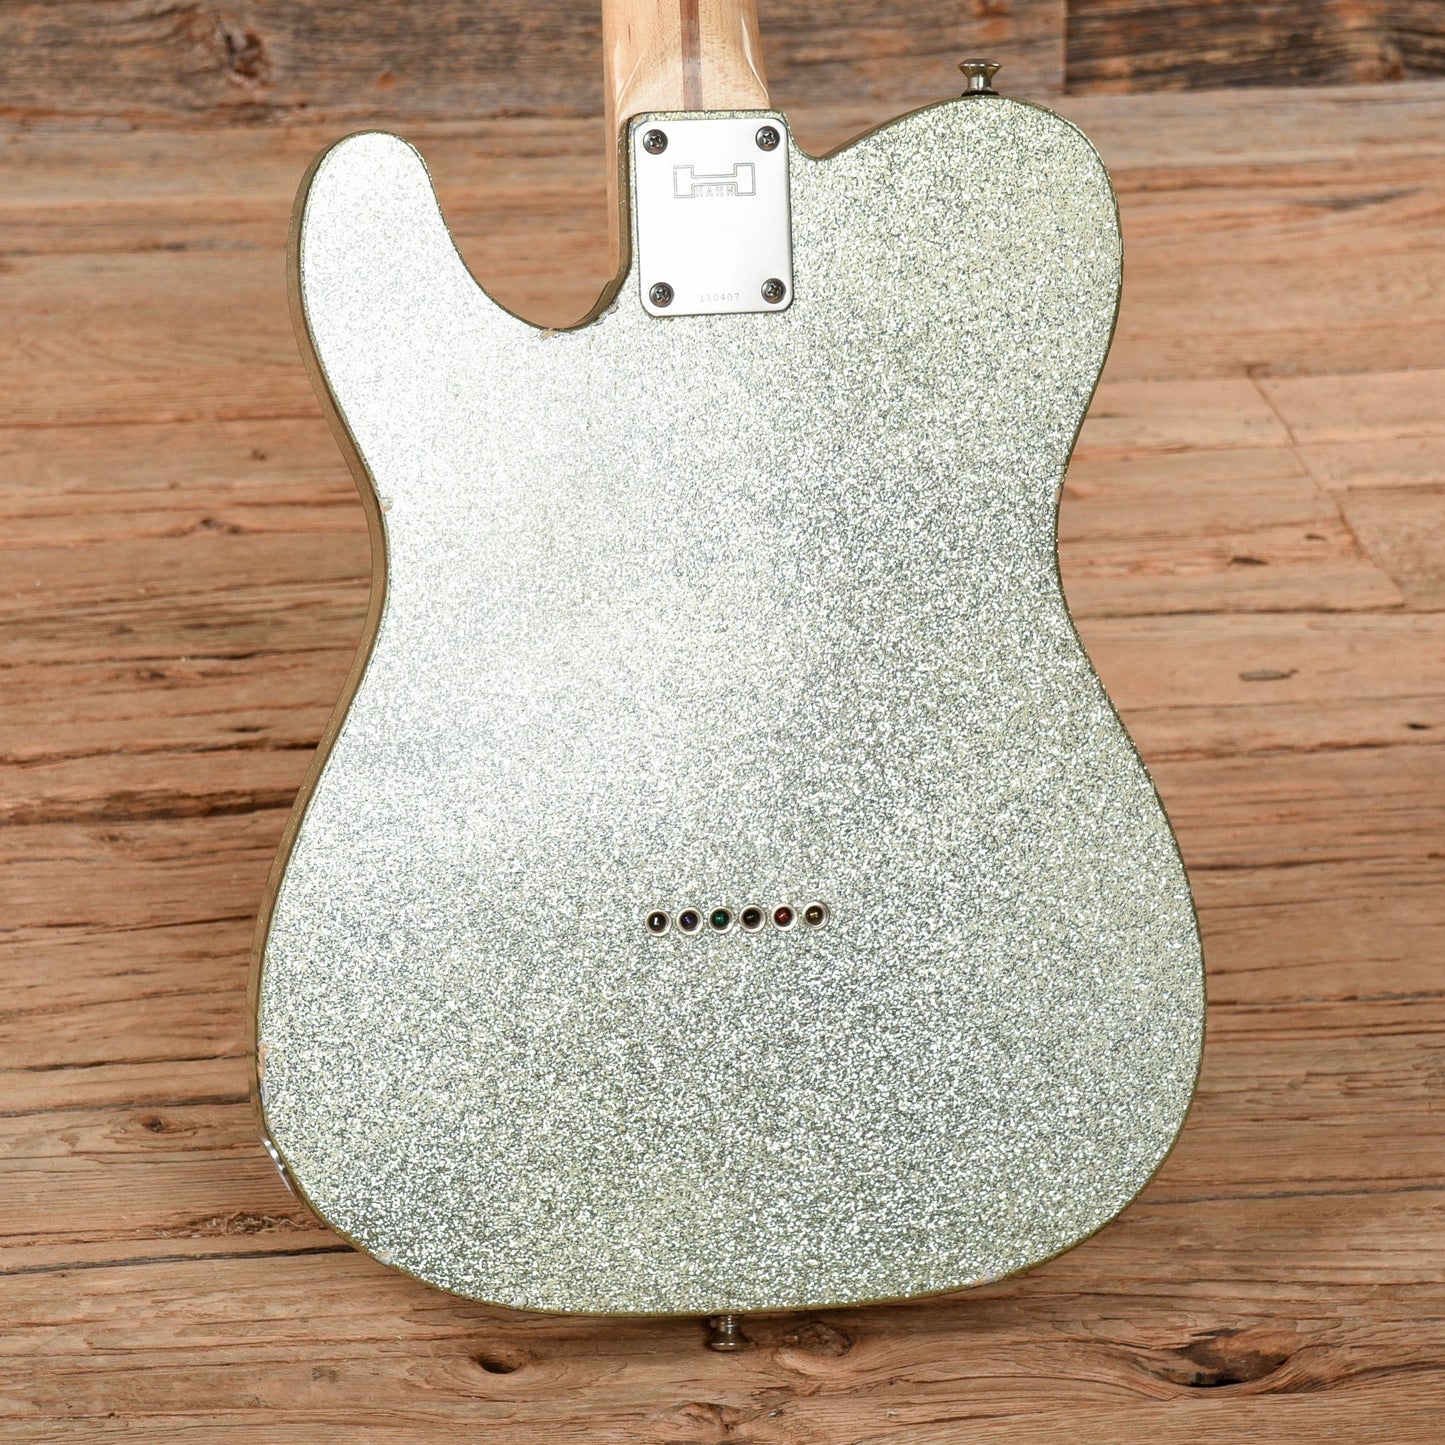 Hahn 228 Silver Sparkle Relic 2011 Electric Guitars / Solid Body